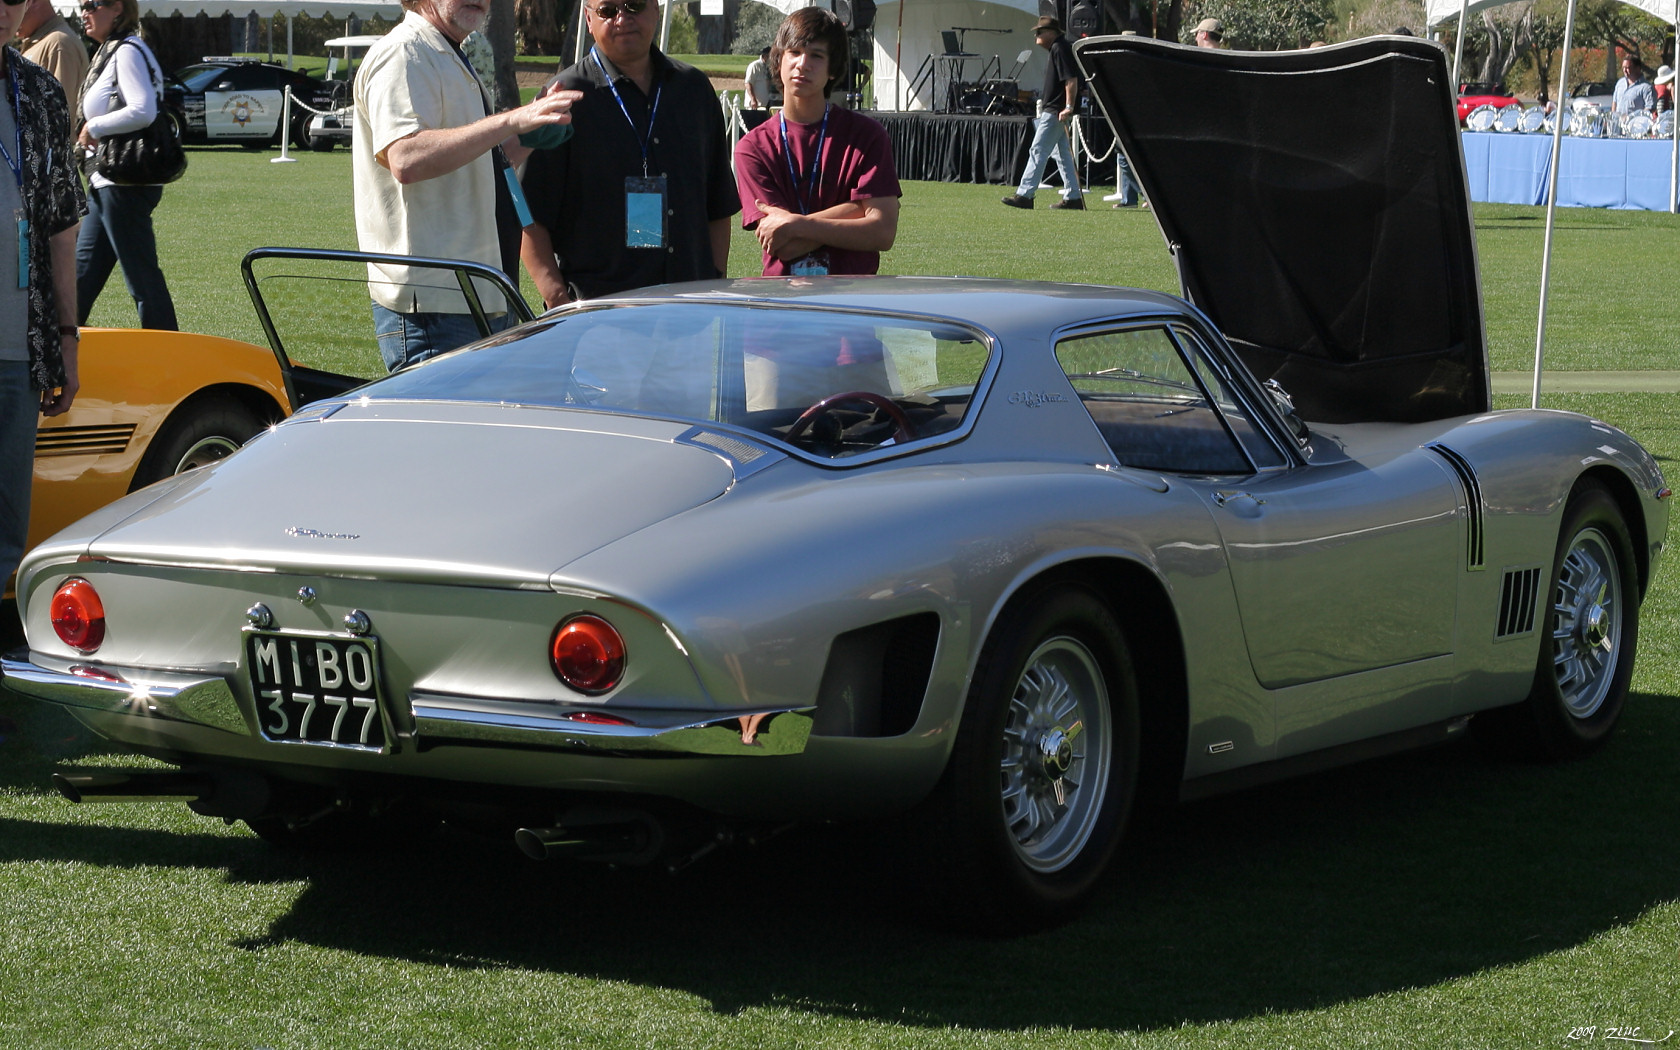 an older silver sports car is on the grass